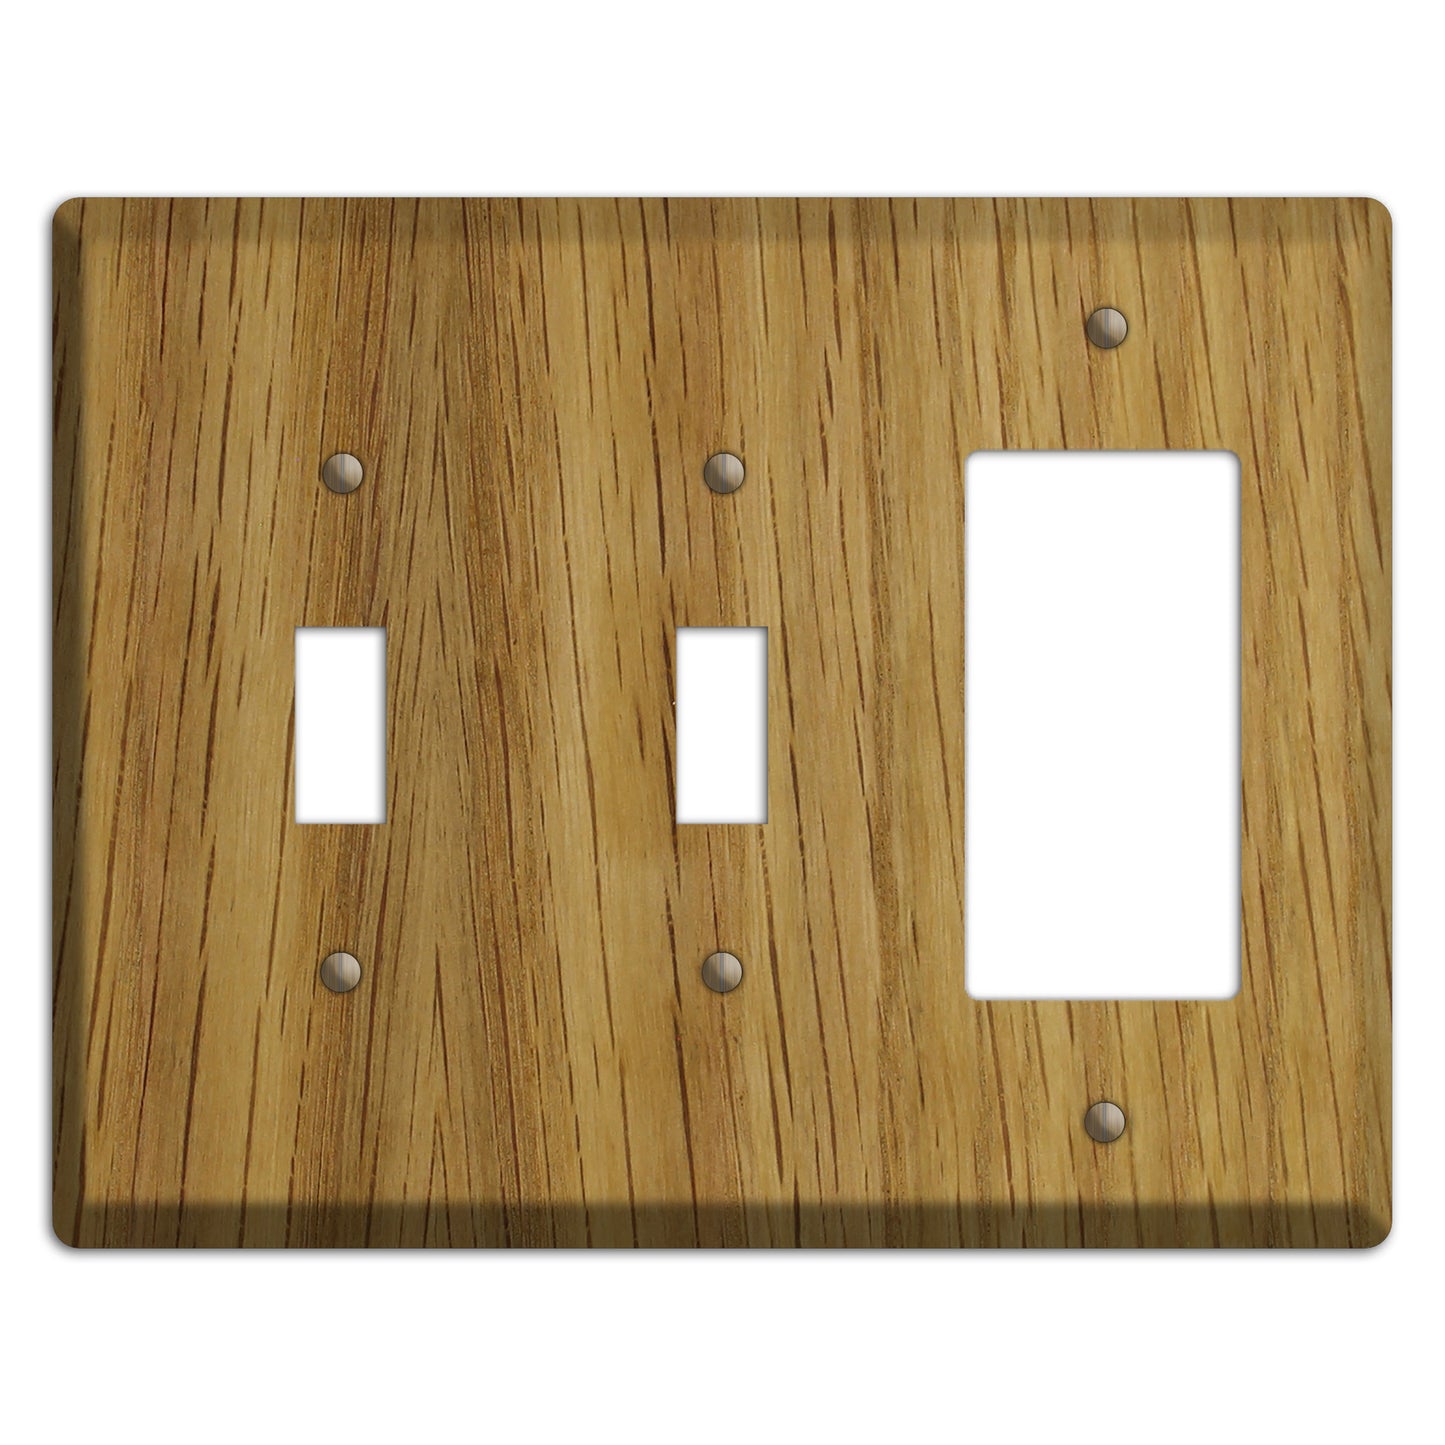 Unfinished White Oak Wood 2 Toggle / Rocker Cover Plate